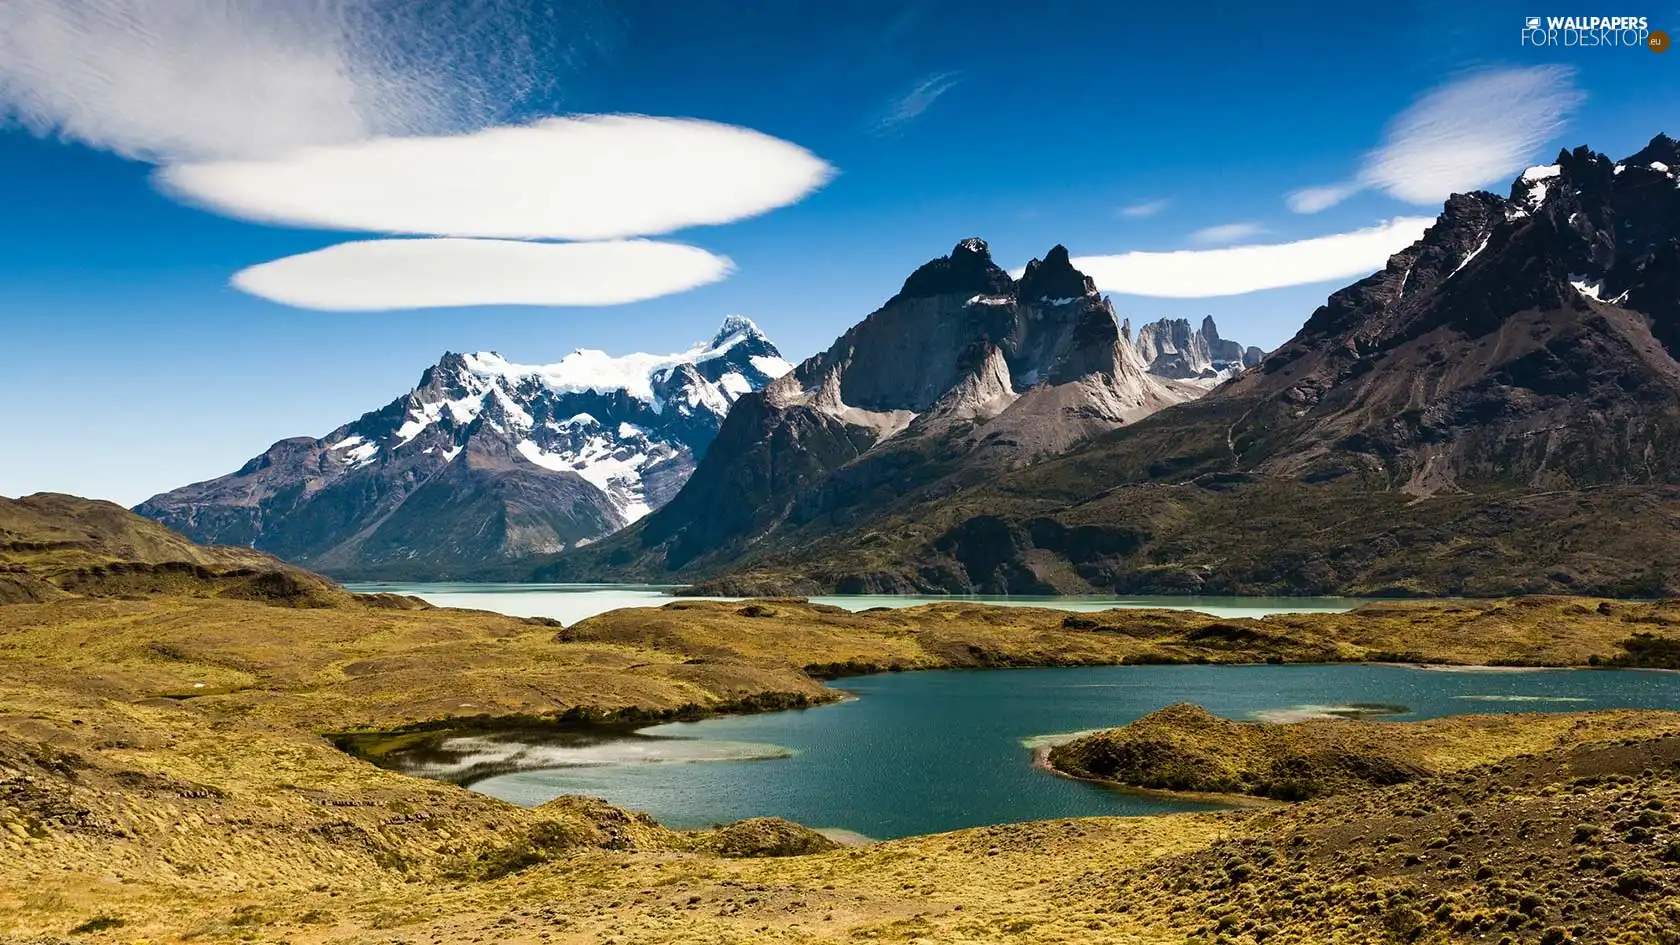 Mountains, lake, Argentina, clouds